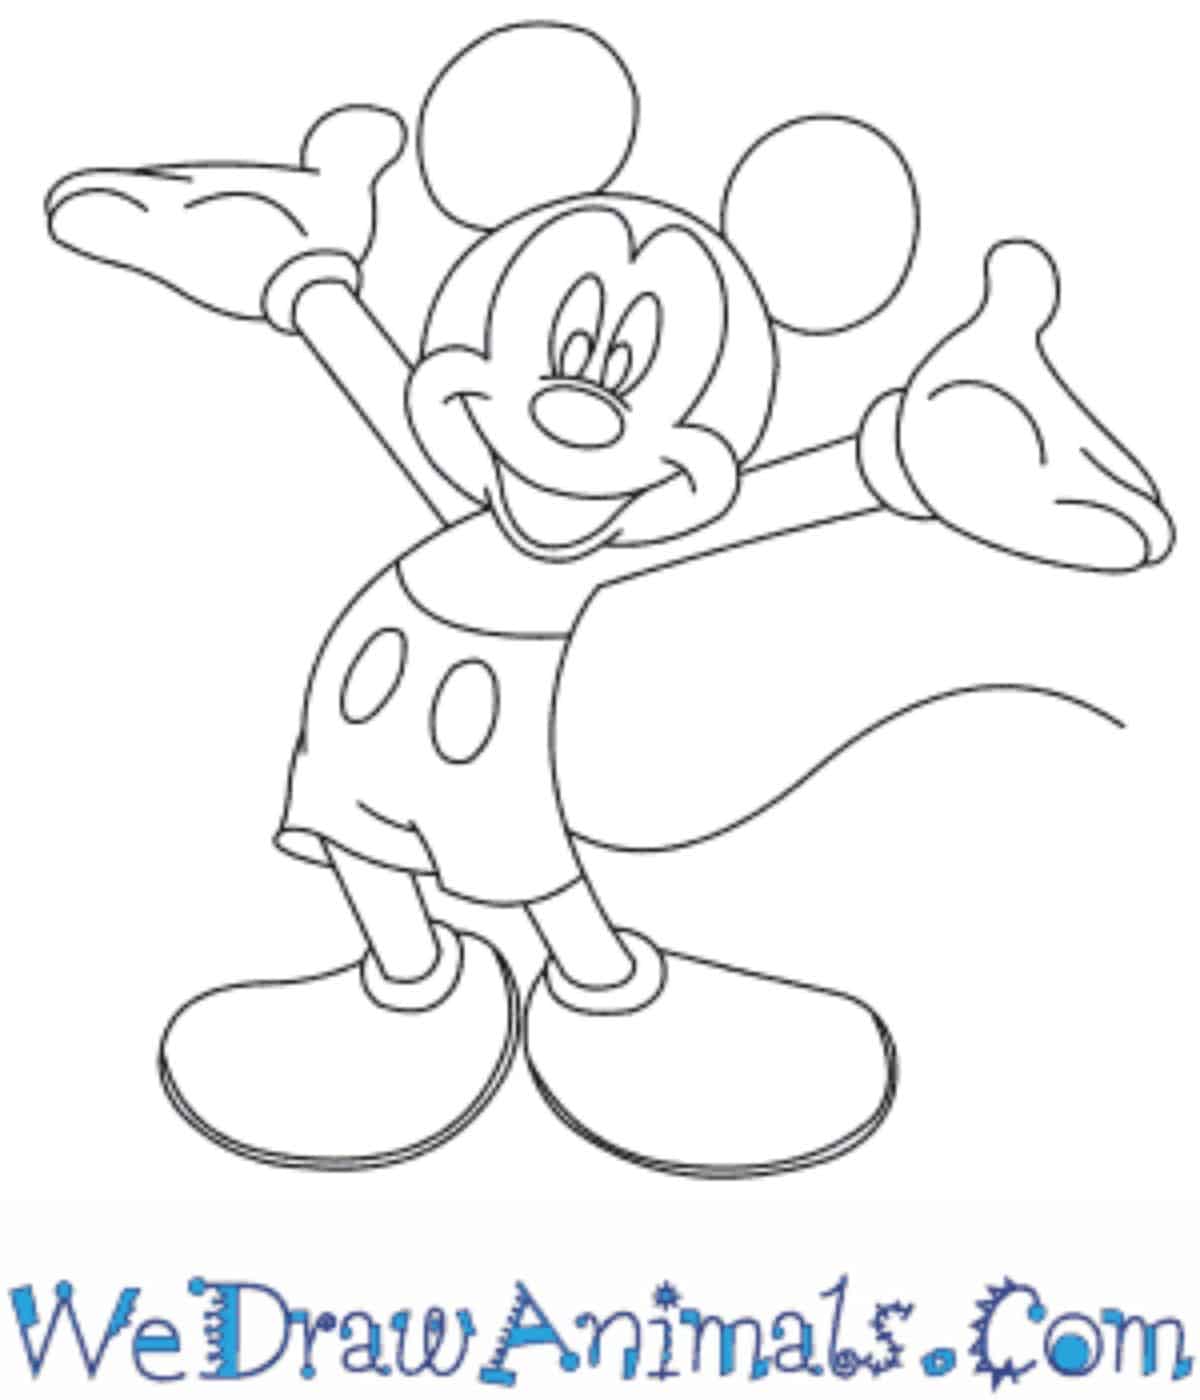 Mickey mouse drawing HD wallpapers | Pxfuel-vachngandaiphat.com.vn